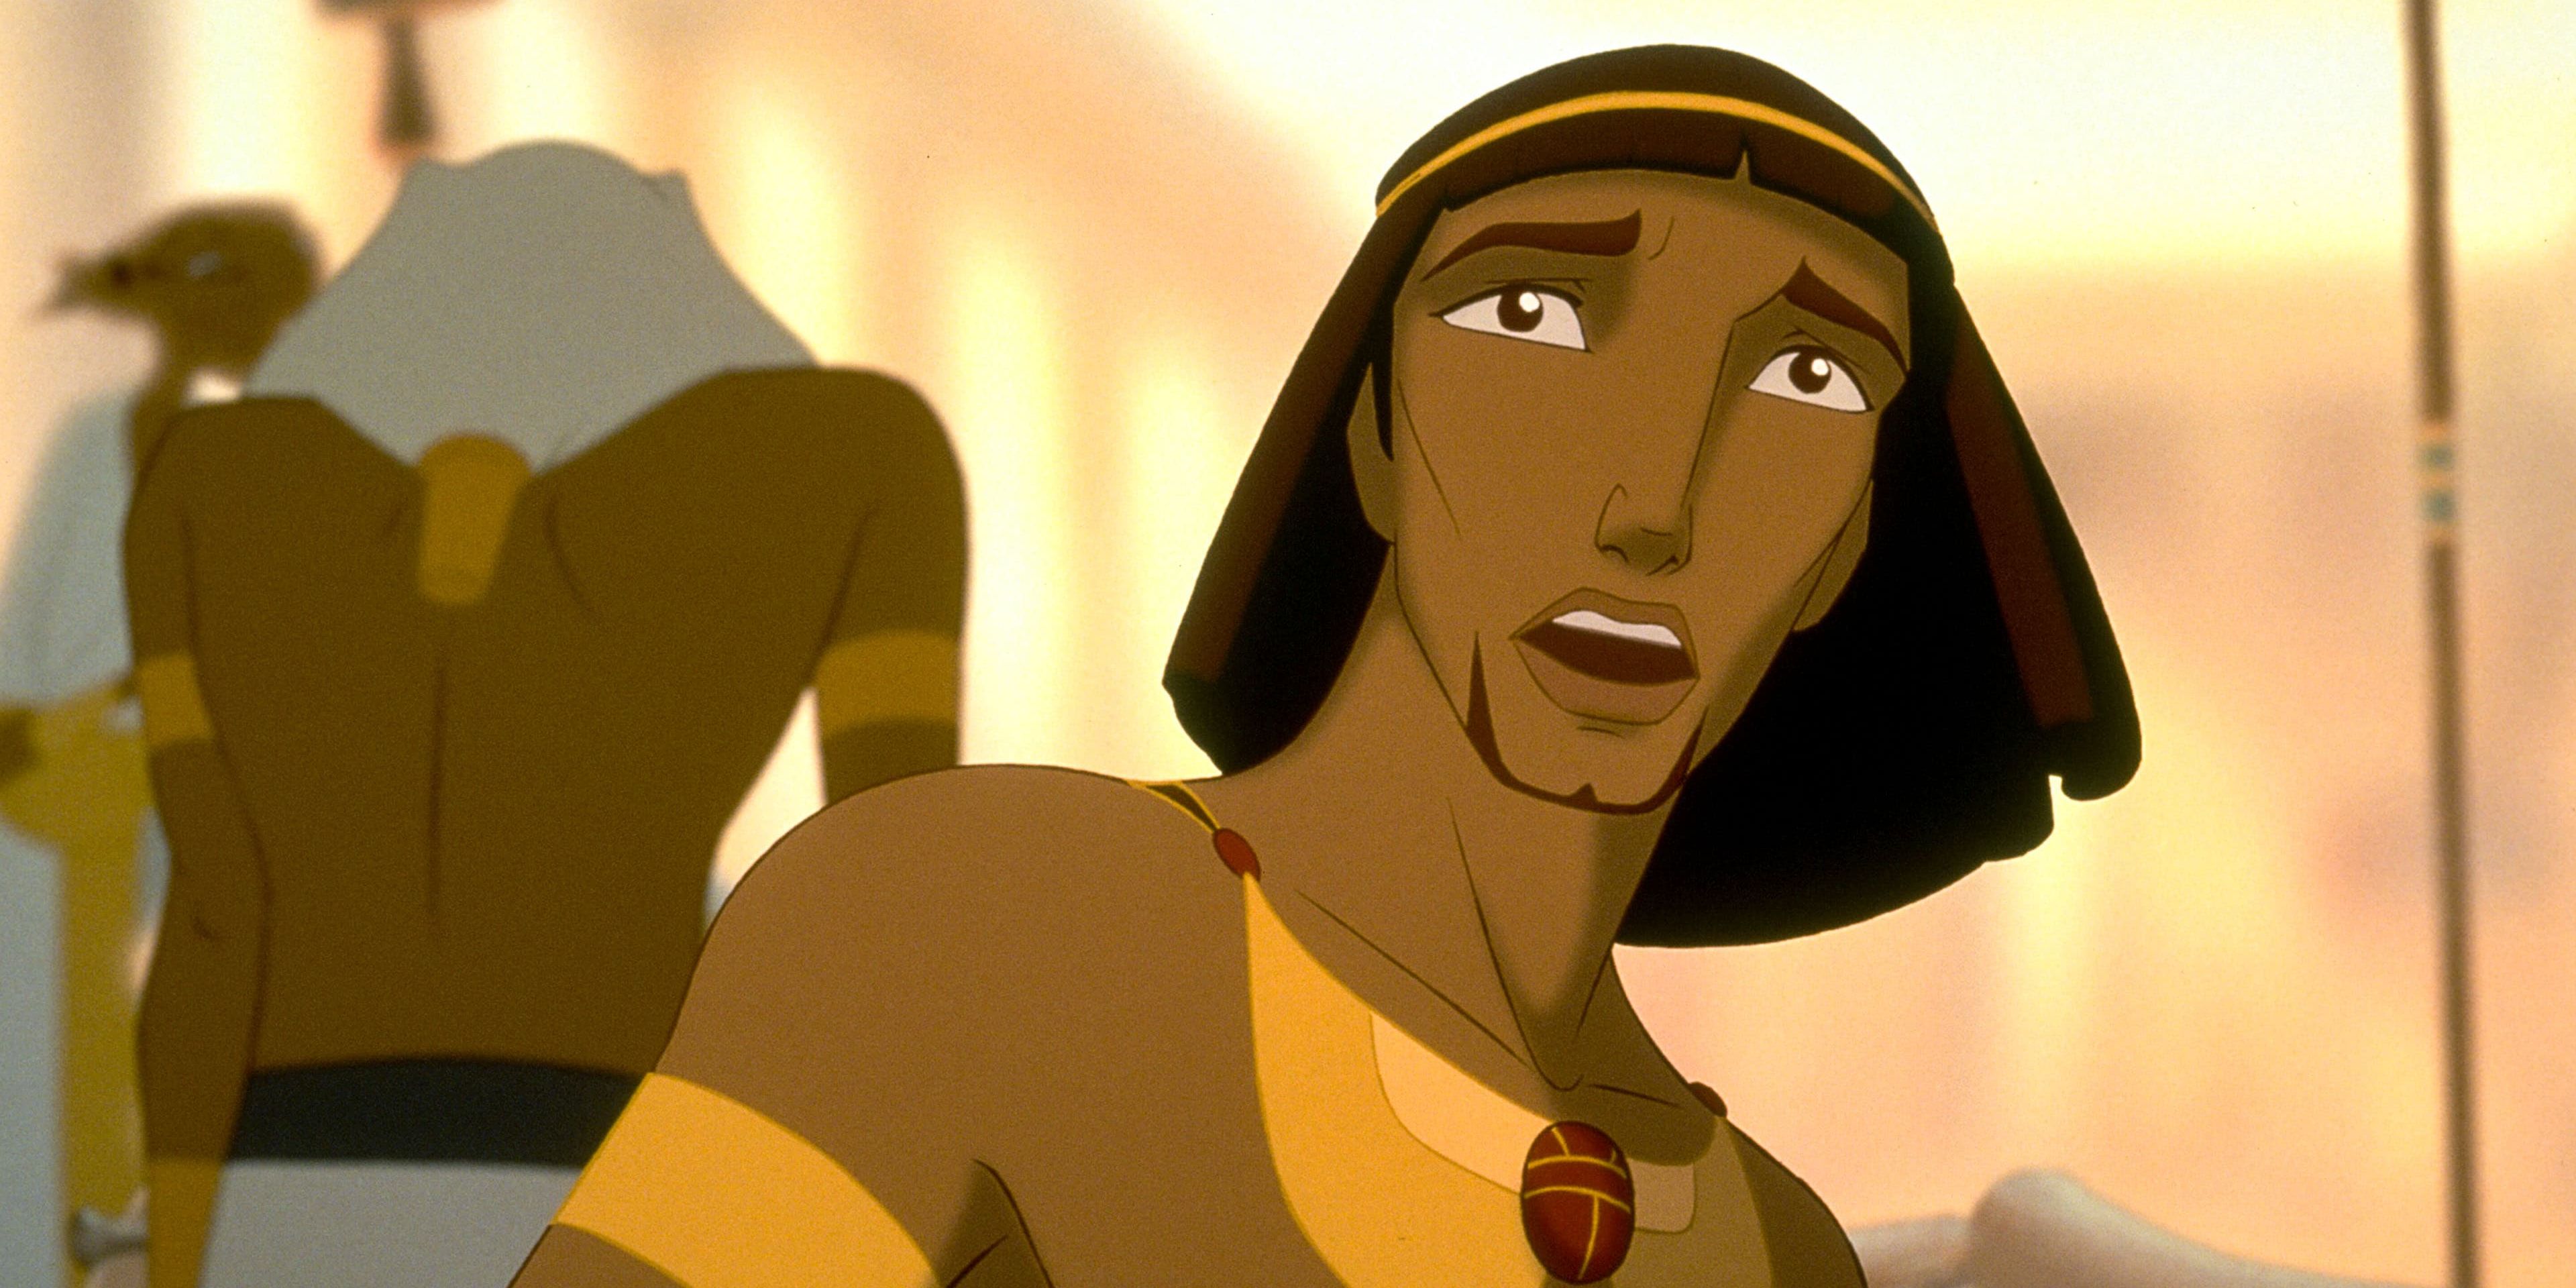 Moses, voiced by Val Kilmer, looking concerned in The Prince of Egypt